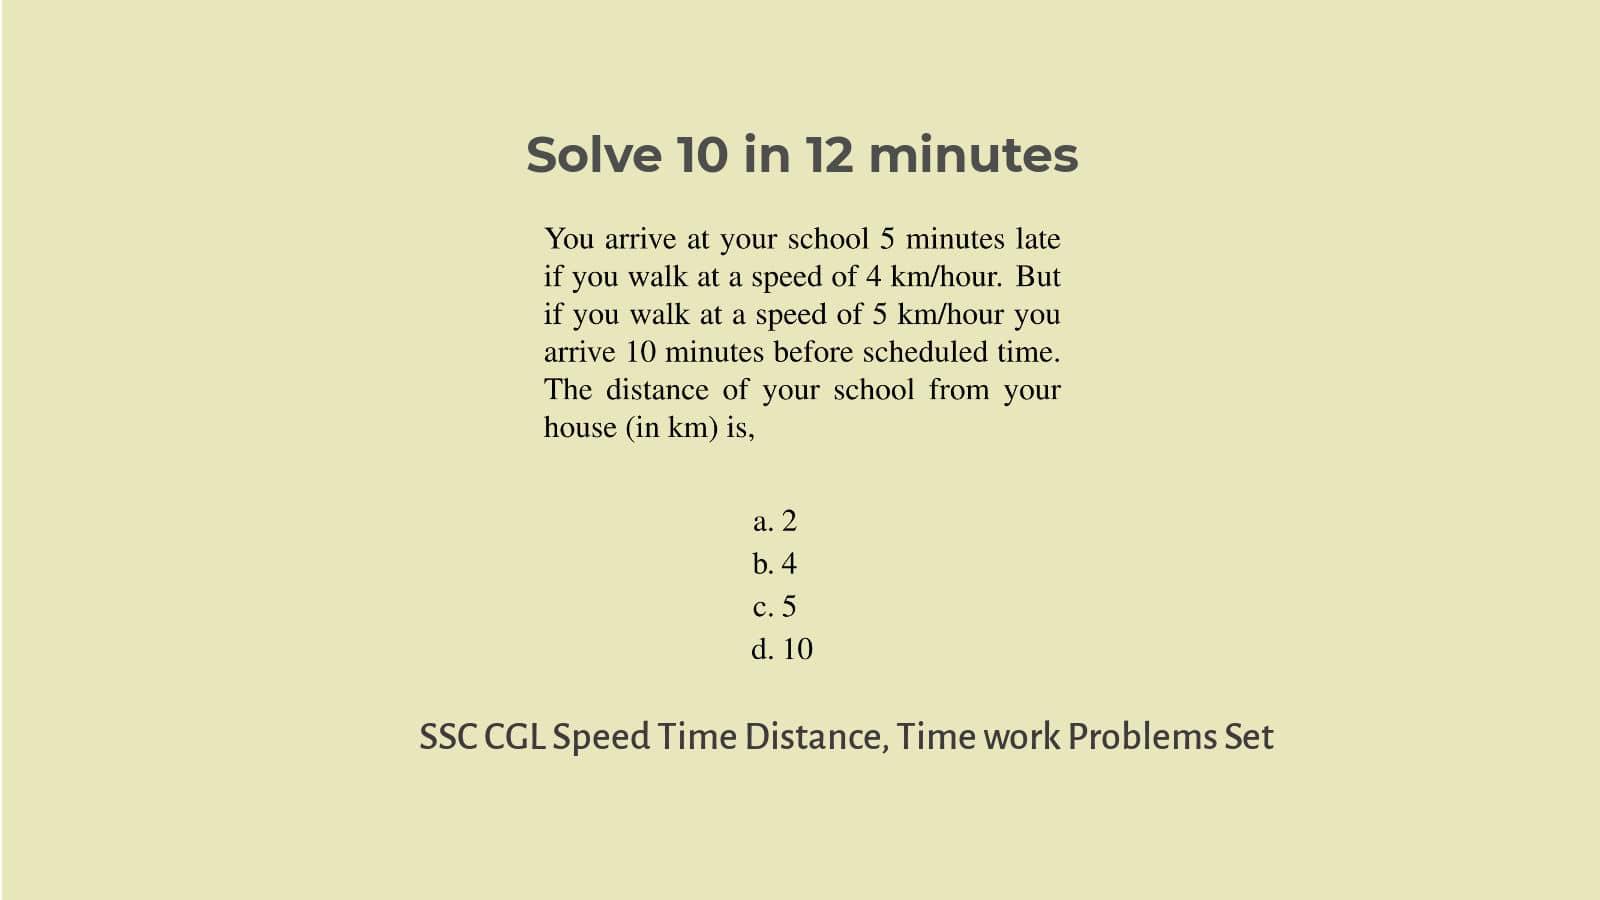 time-and-work-problems-for-ssc-cgl-set-44.jpg